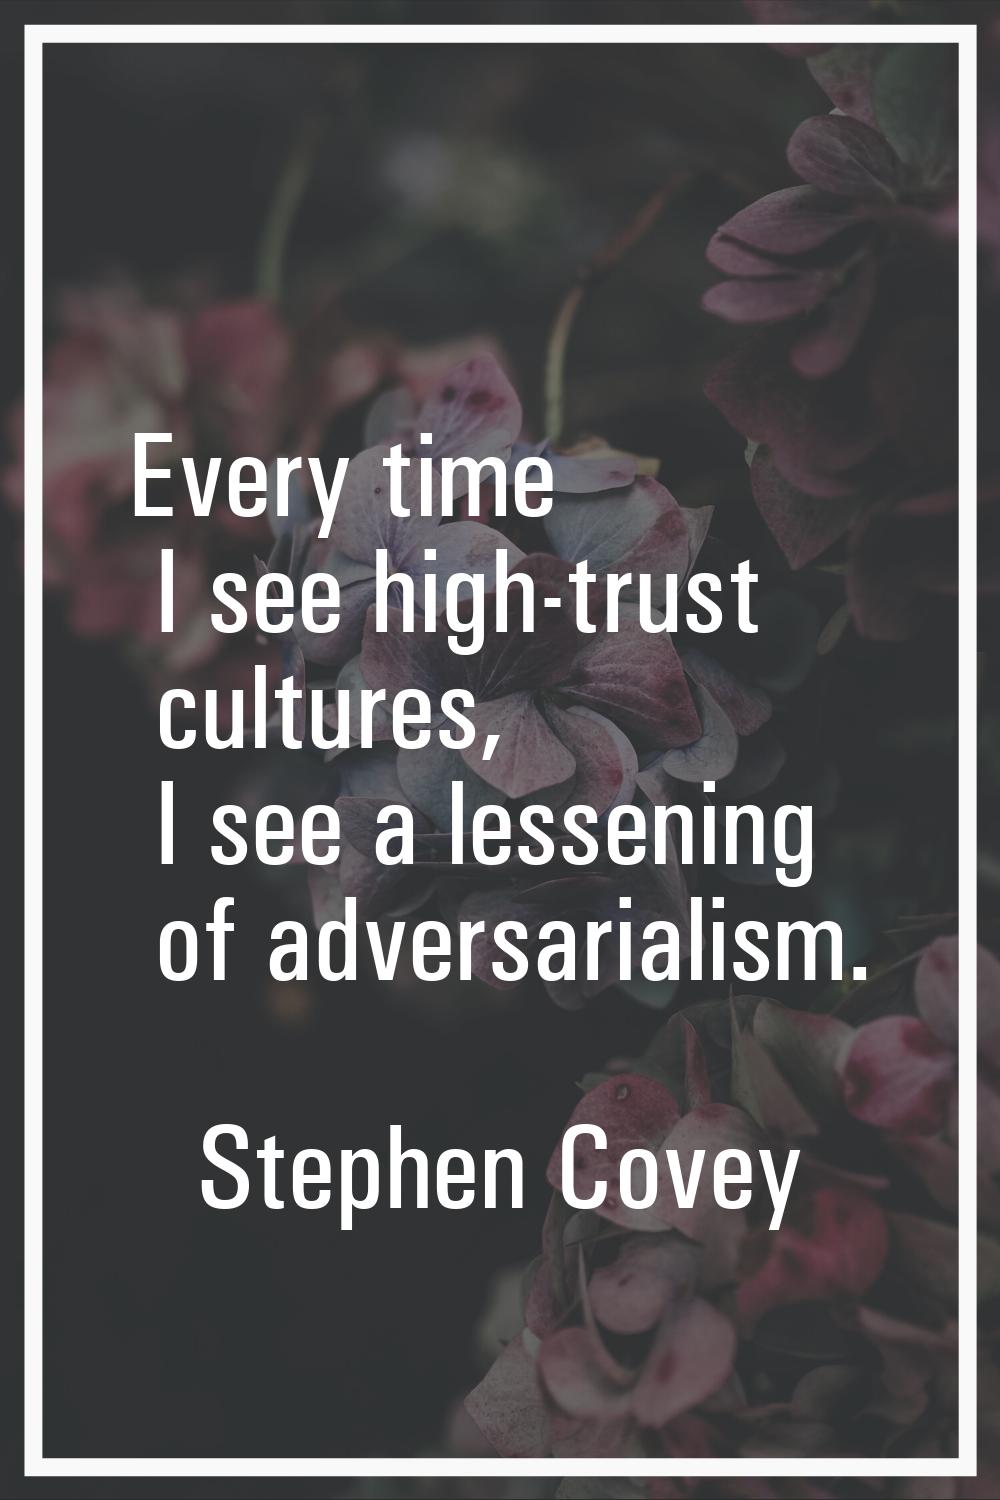 Every time I see high-trust cultures, I see a lessening of adversarialism.